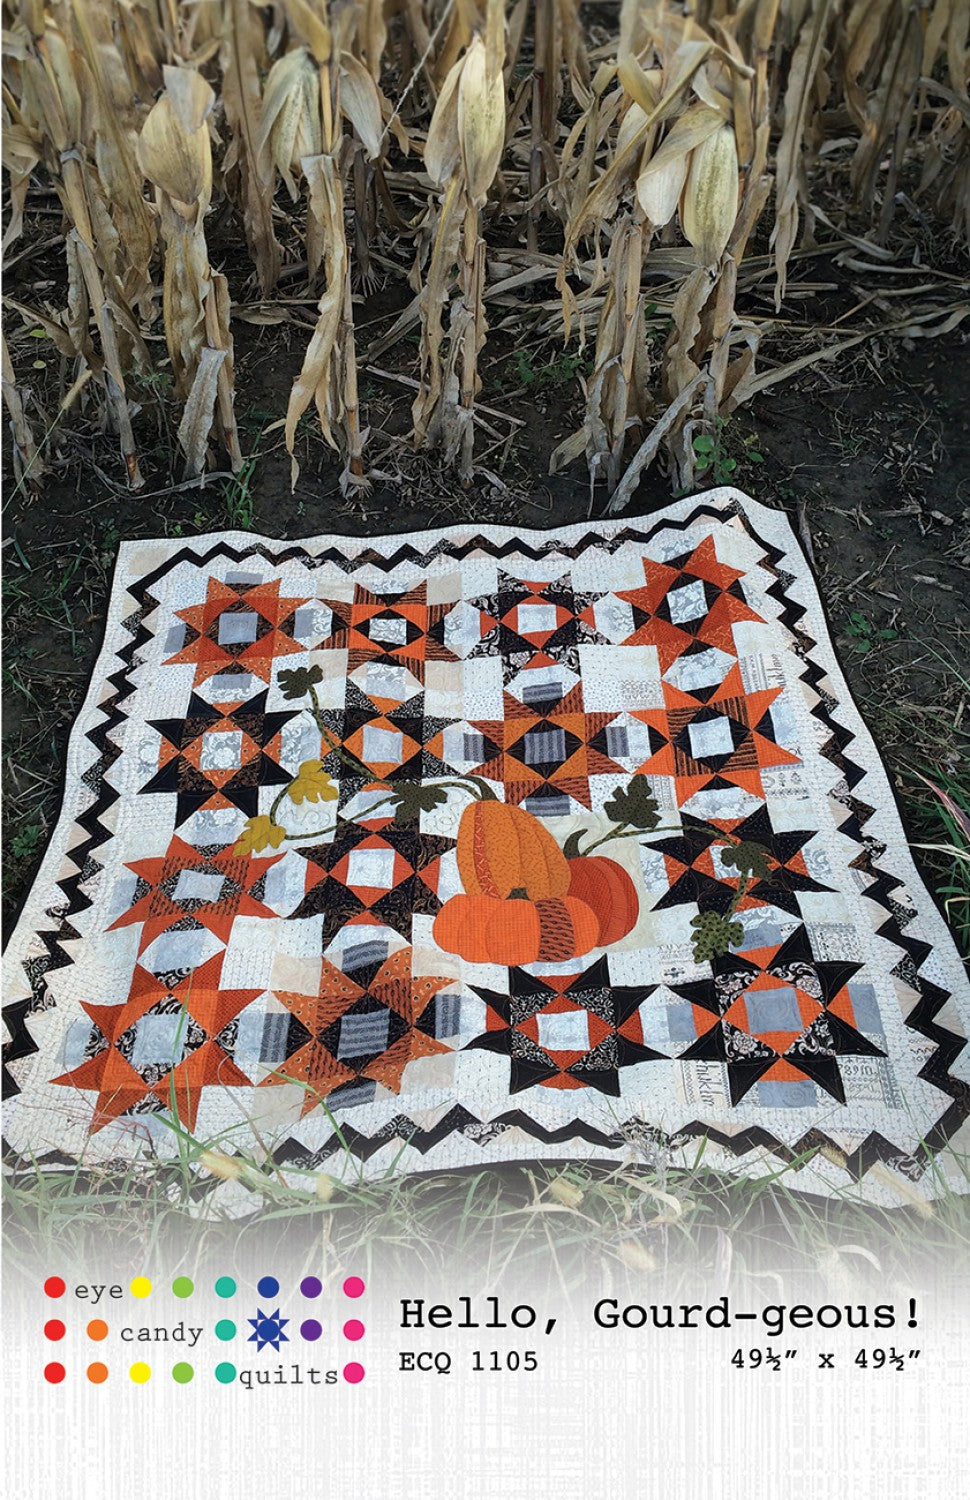 Hello, Gourd-geous! by Eye Candy Quilts